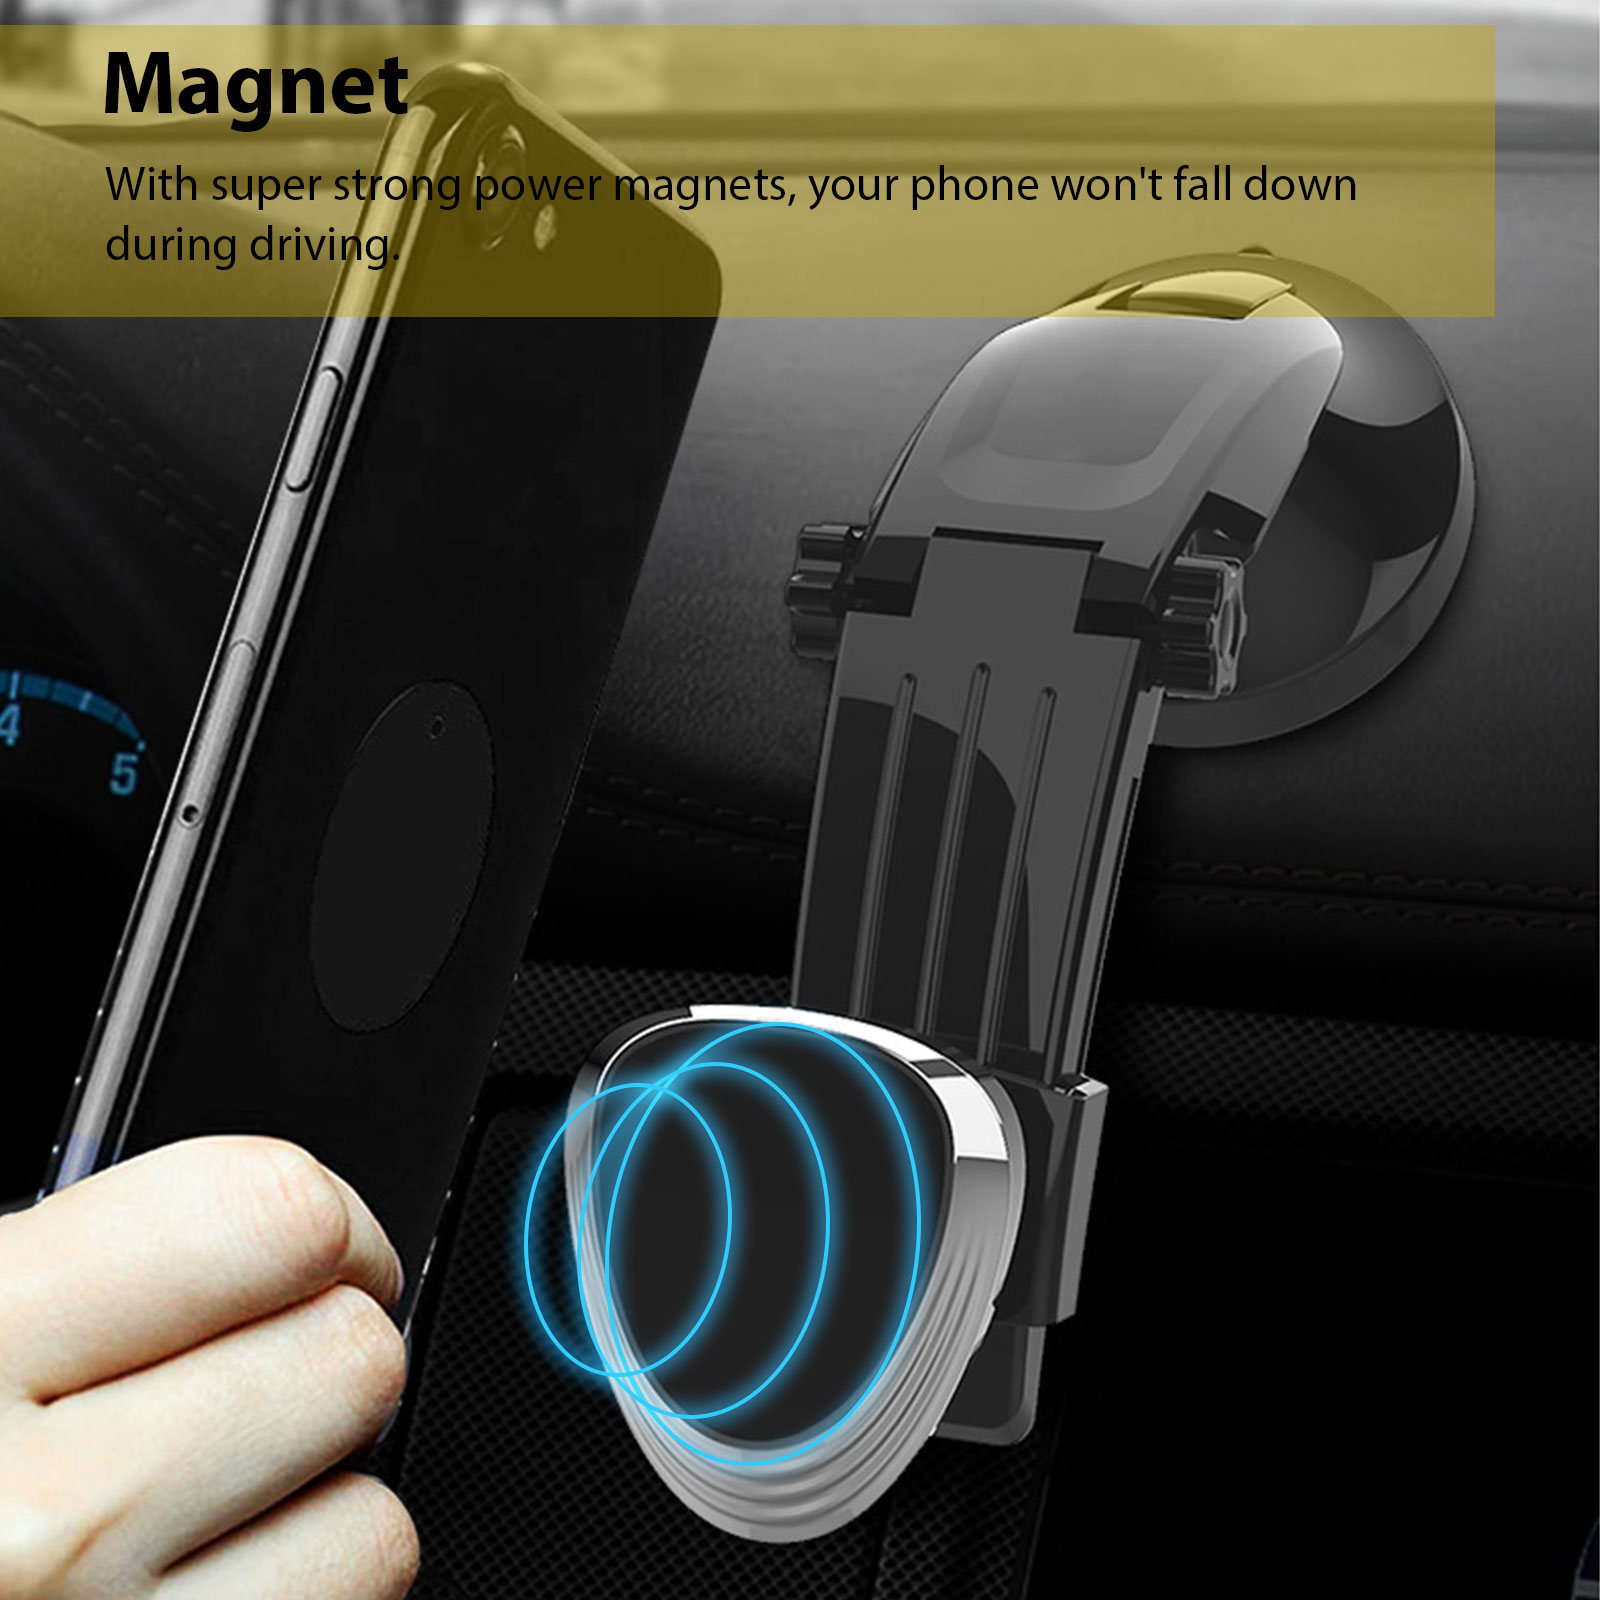 Magnetic Car Dash Mount Dock Window Dashboard Holder For Cell Phone ...